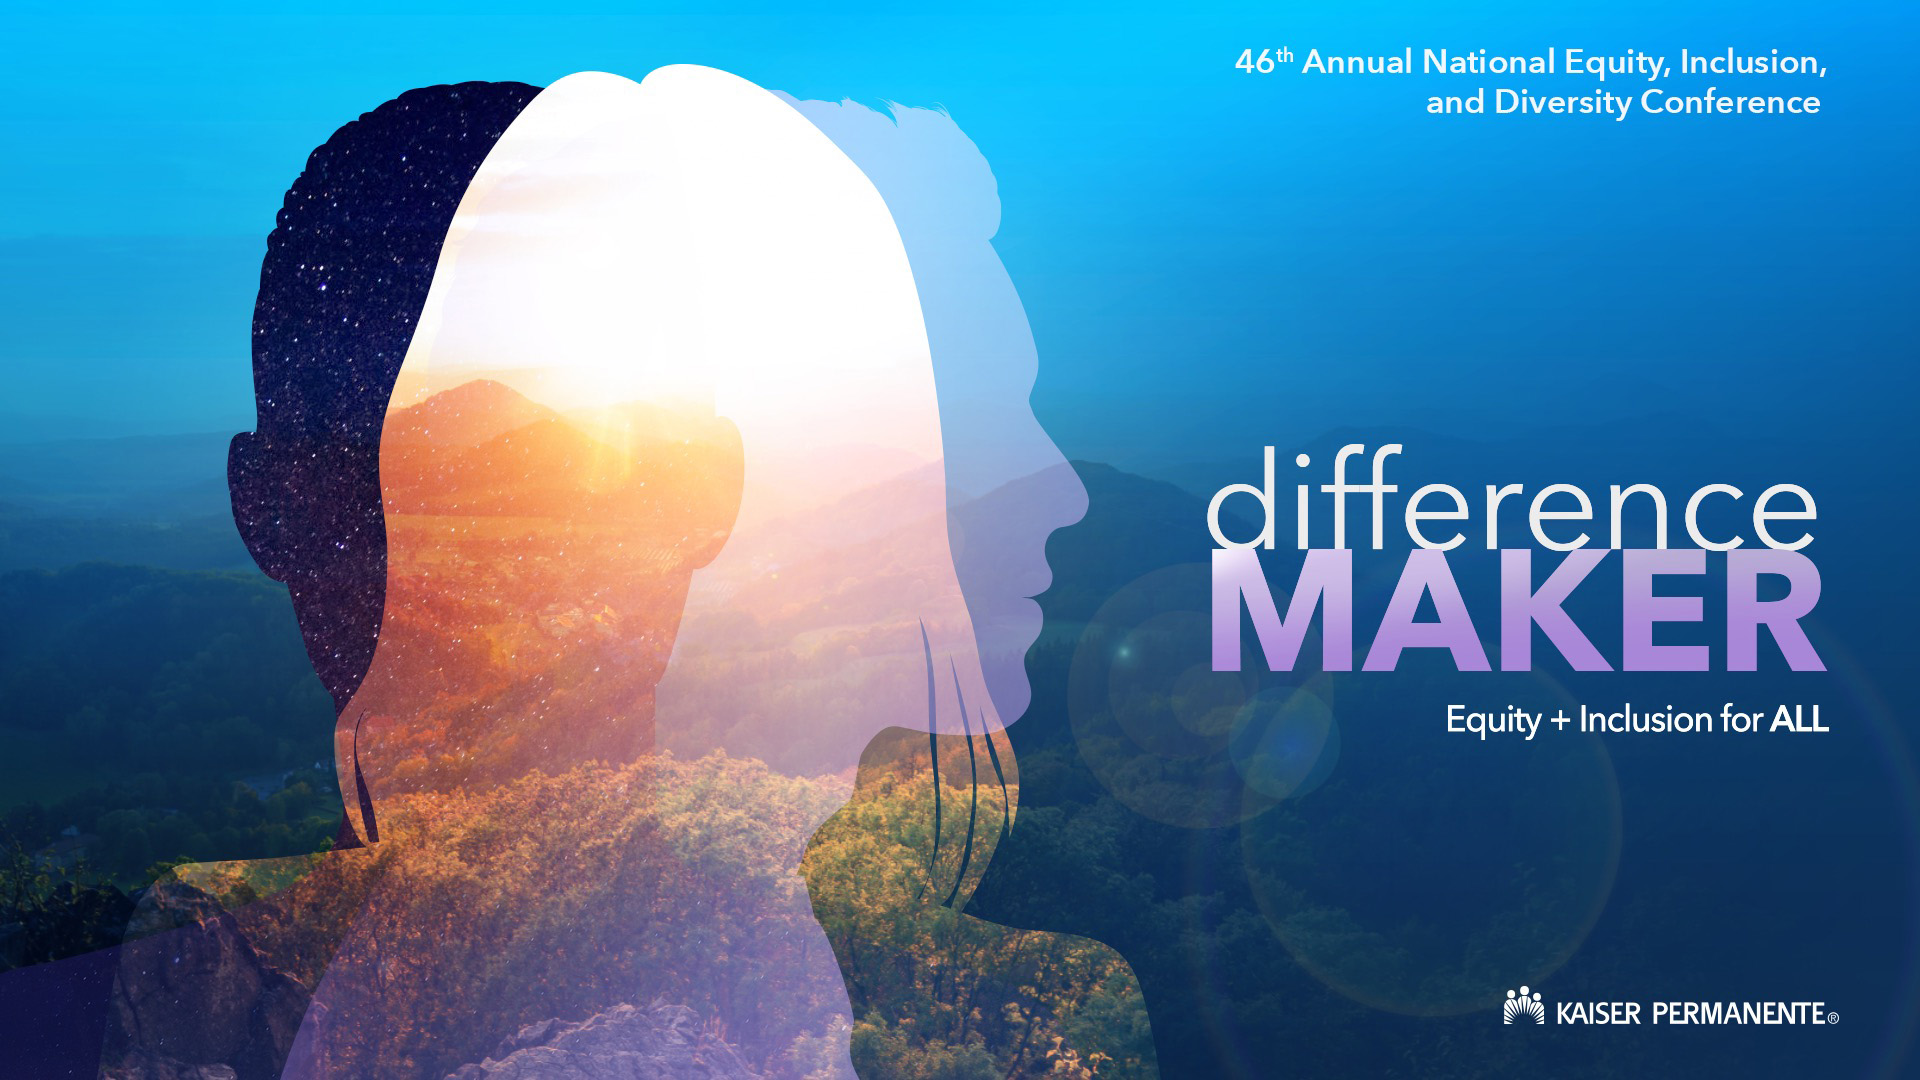 The template cover design for the Kaiser NEID 2023 event. It has silhouettes with images and sunlight showing through them and the theme text "Difference Maker"